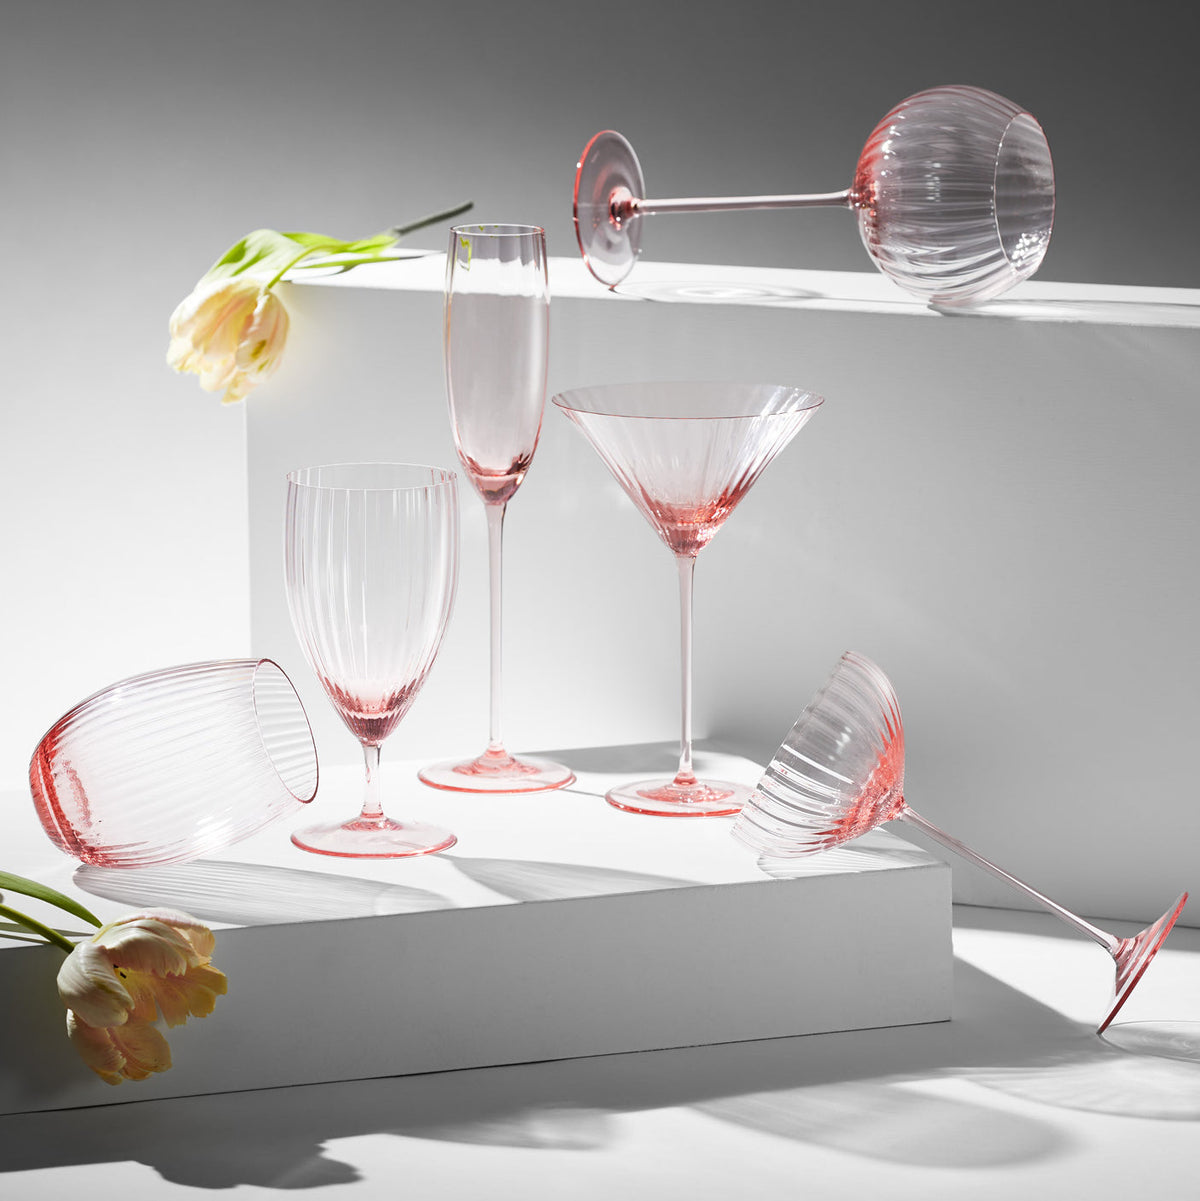 Quinn rose pink mouth-blown crystal martini glasses from Caskata.